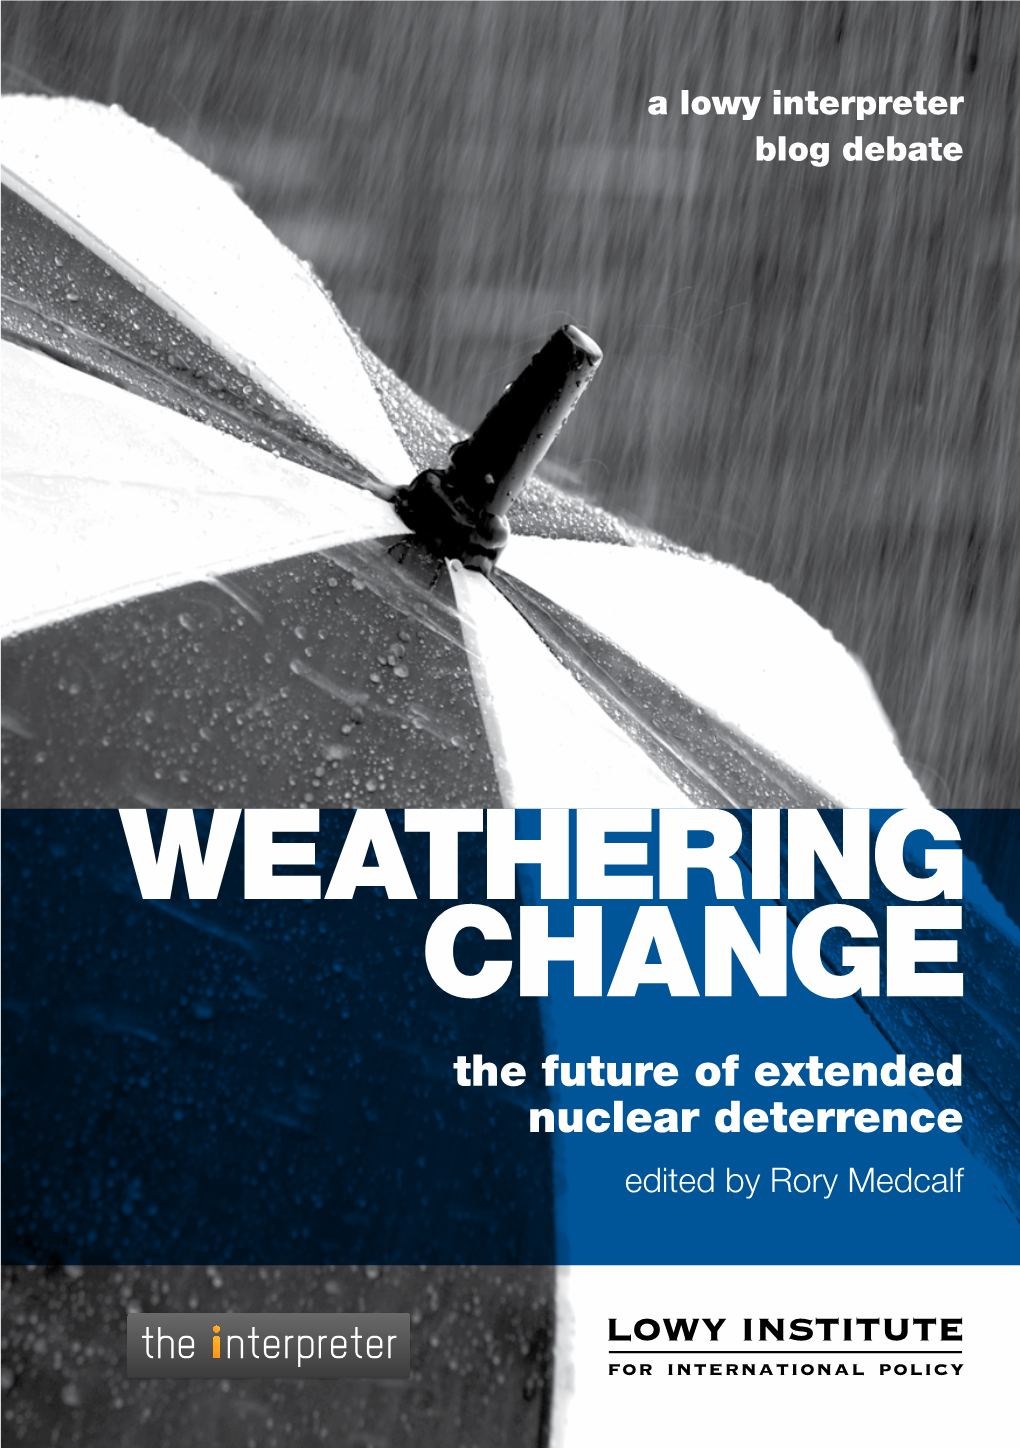 Weathering Change Is a Compilation of Posts from a Debate Conducted in Early 2011 on the Interpreter, the Lowy Institute’S Innovative Weblog